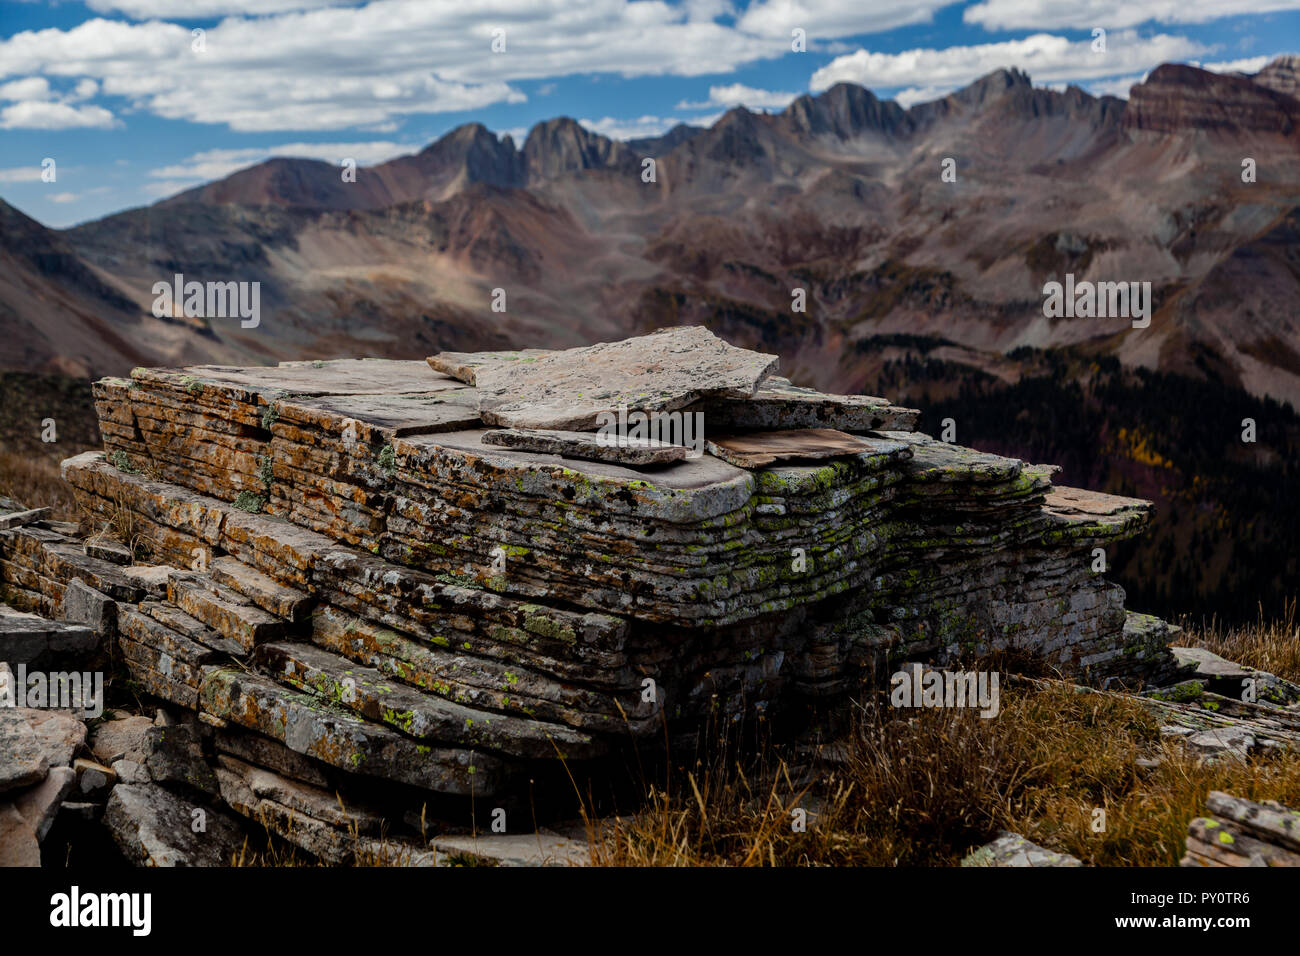 Sediments of various ancient environments take millions of years to lithify into the stratified layers we see in the rocky mountains. Stock Photo